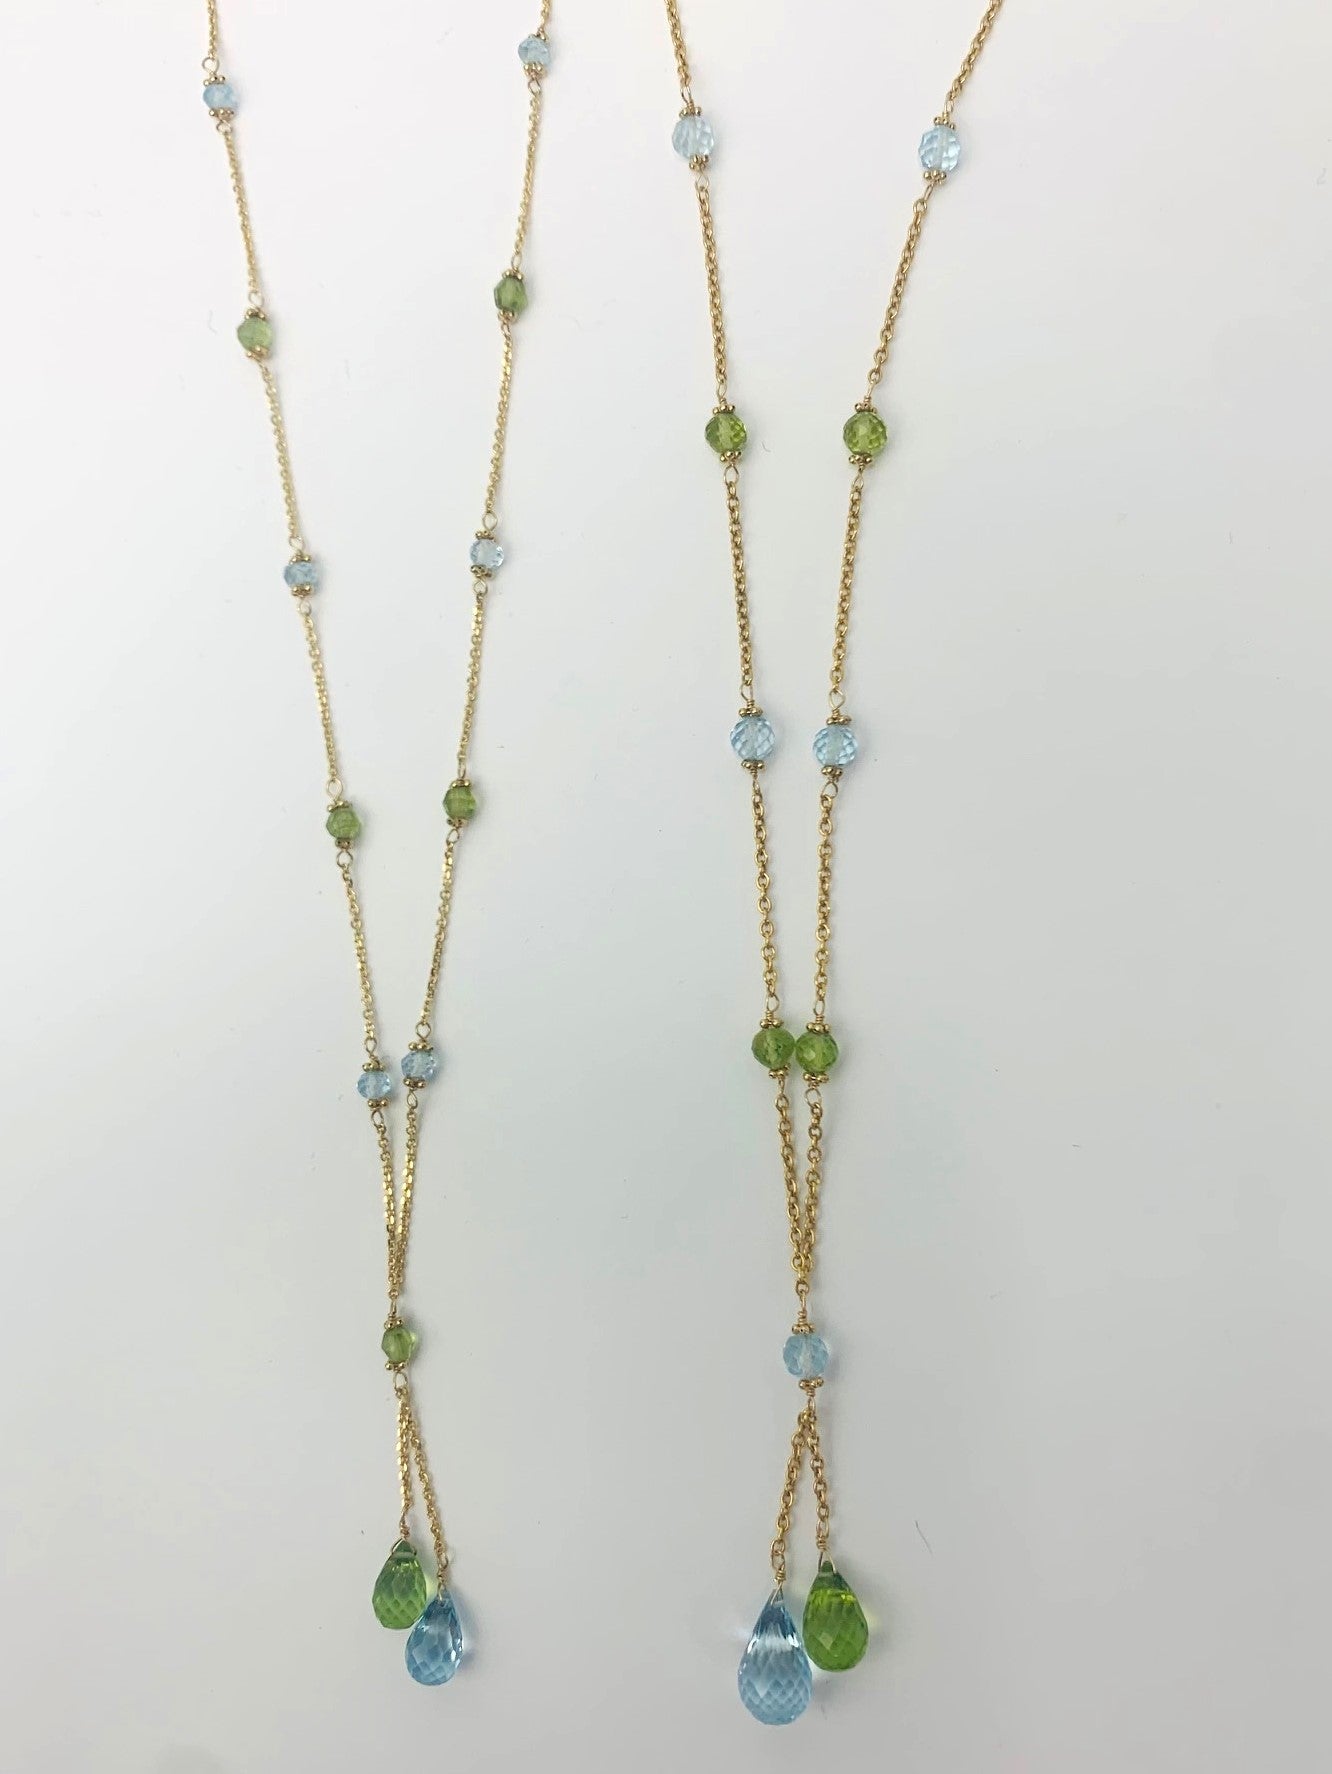 15" - 17" Peridot and Blue Topaz Lariat Necklace in 14KY - NCK-020-LARGM14Y-PDTBT-16